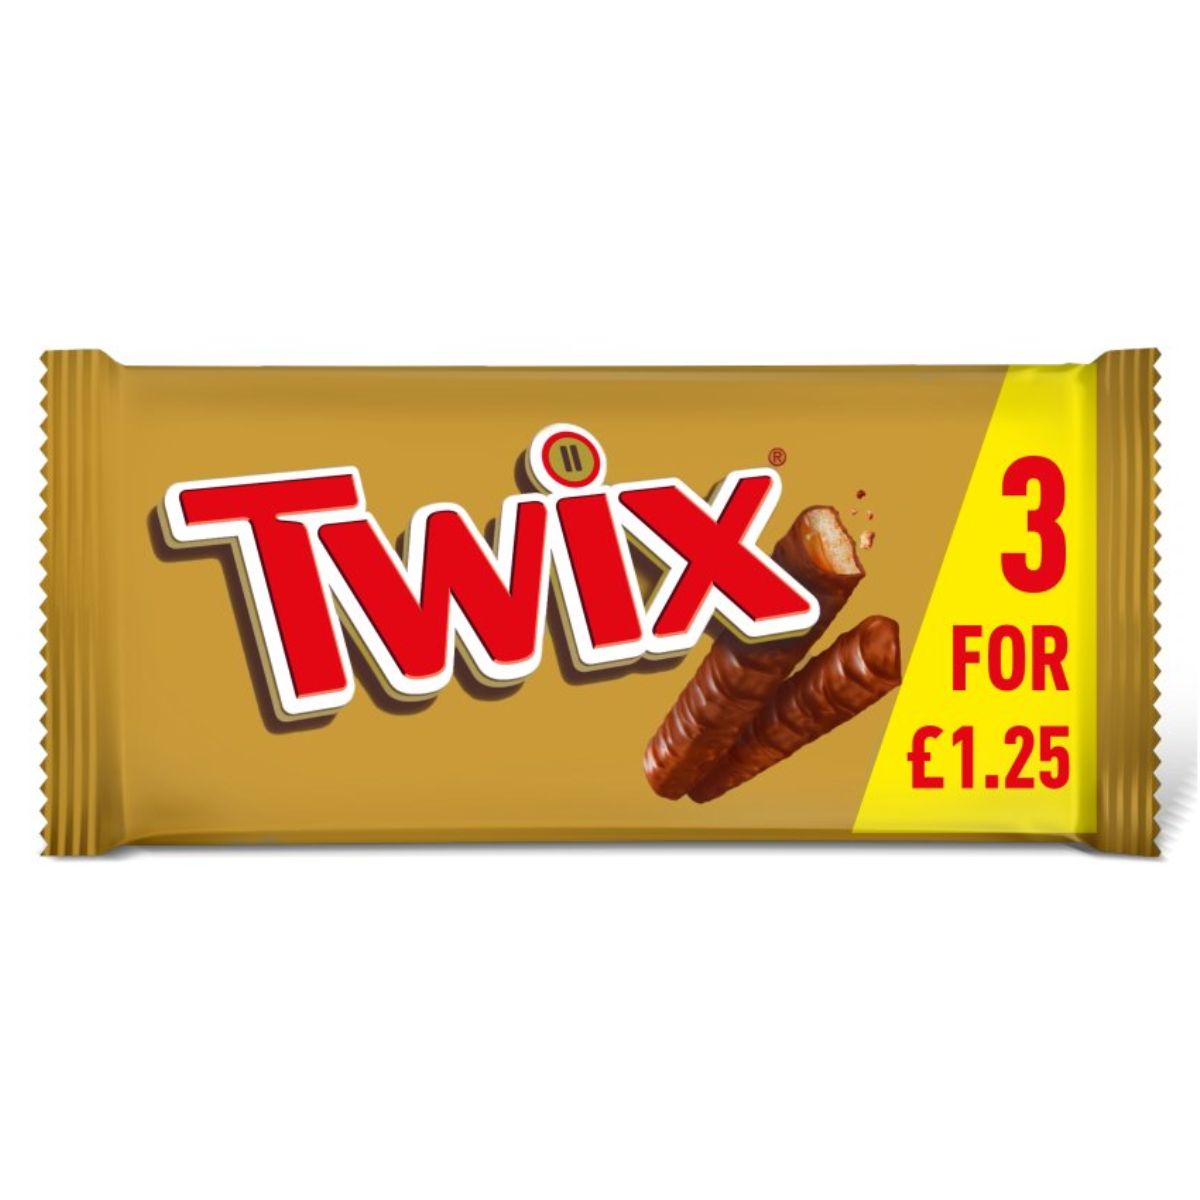 A Twix - Caramel & Milk Chocolate Fingers Biscuit Snack Bars Multipack - 3 x 40g on a white background.